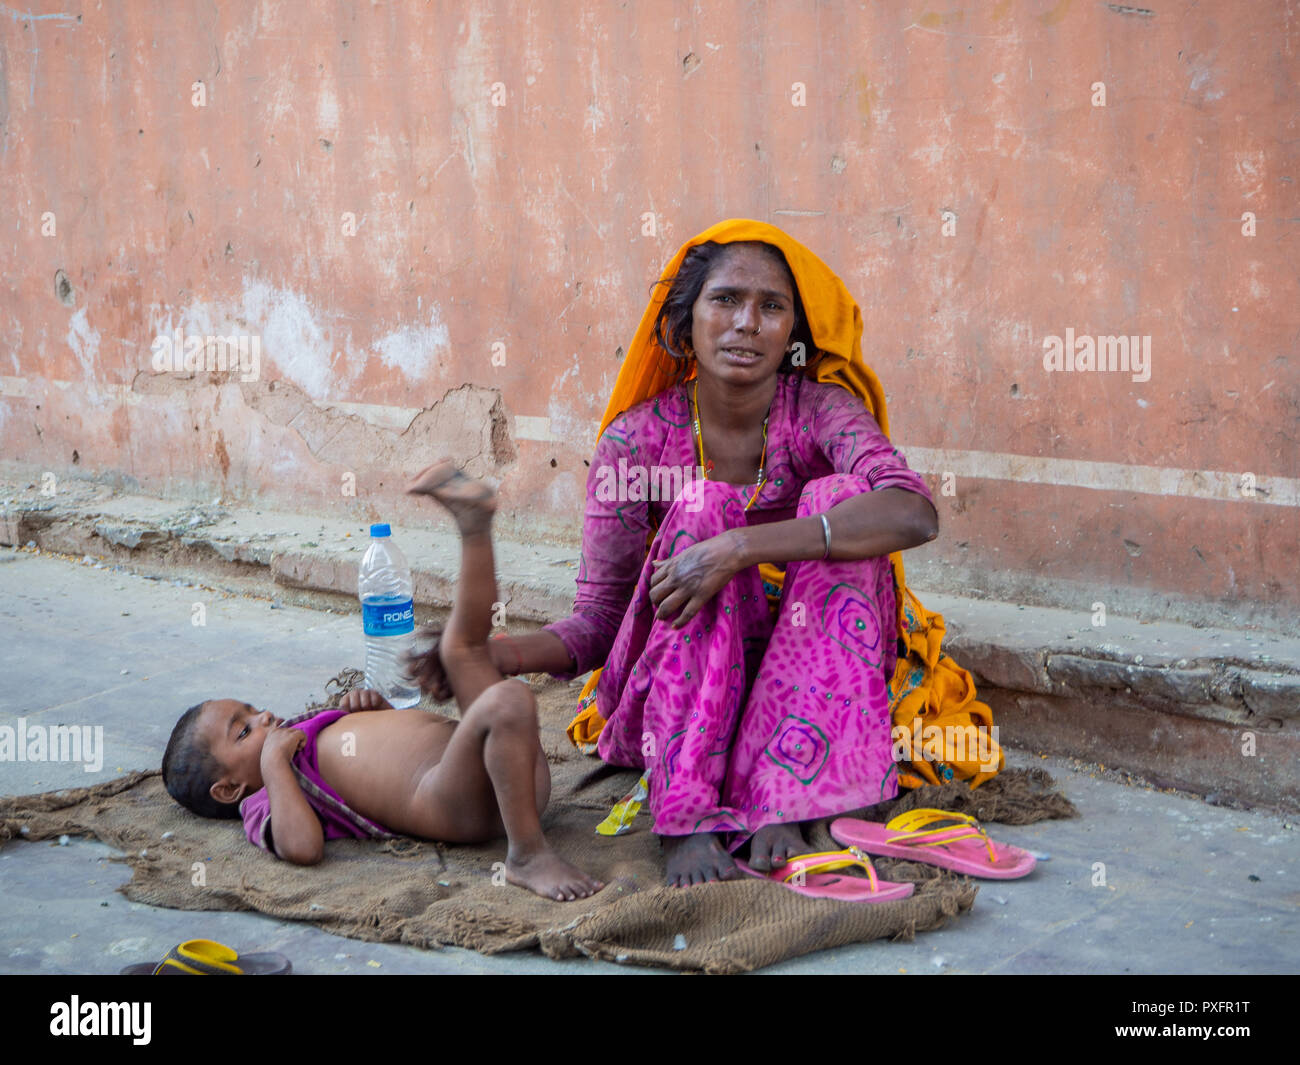 Jaipur, India, 20th September 2018 Daily scenes of local people watching tourists, asking for money or posing for them Stock Photo